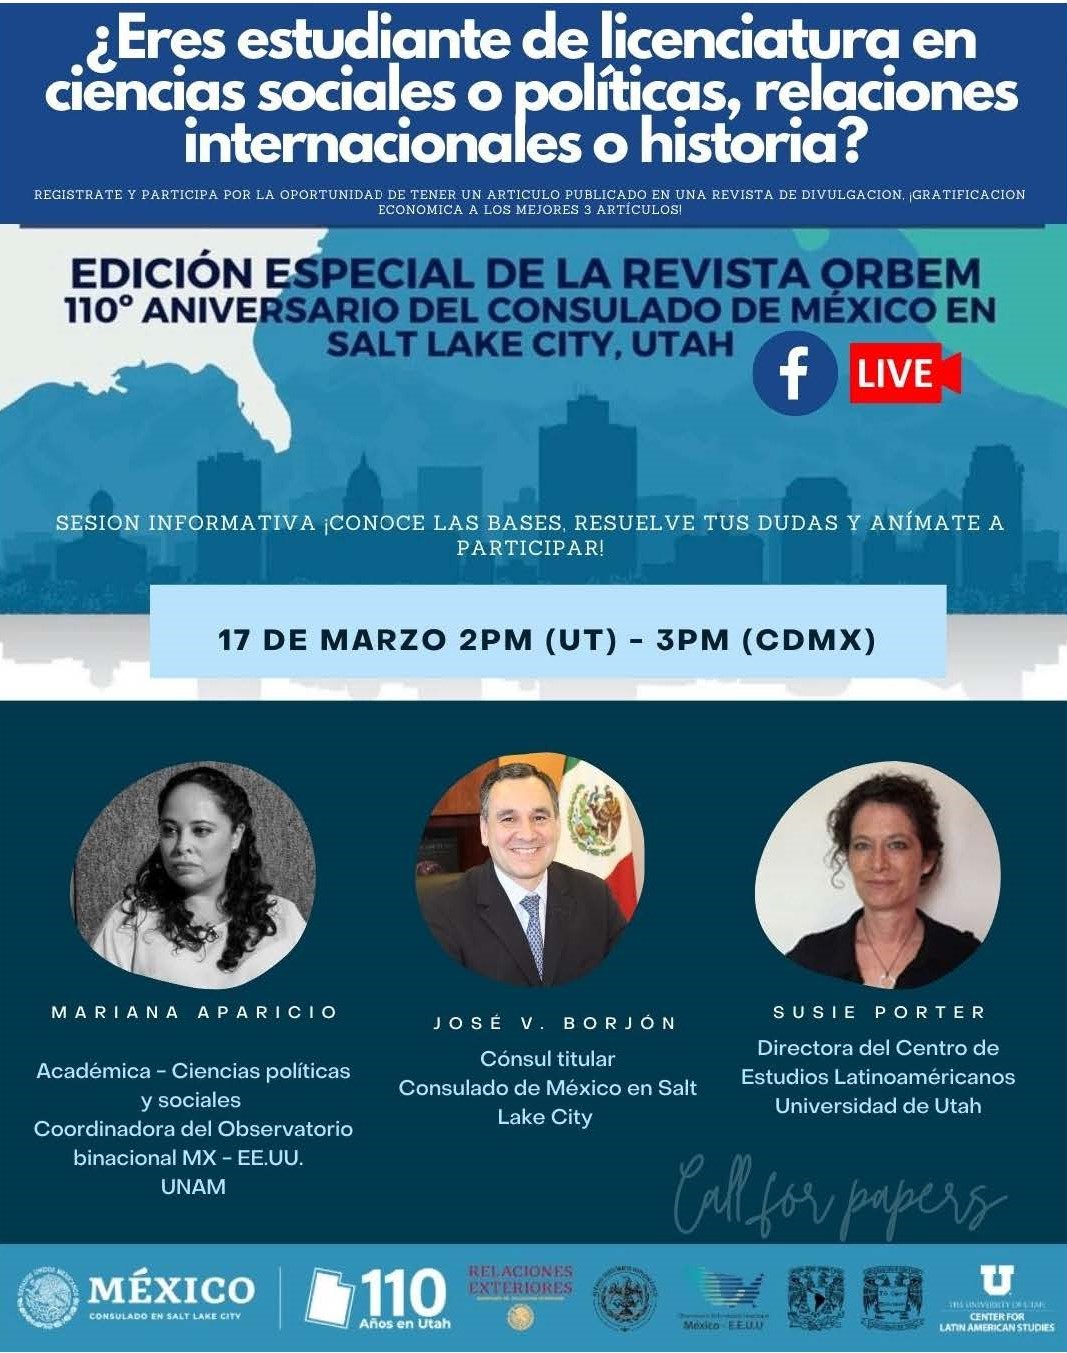 ORBEM Magazine Special Edition 110 Anniversary of the Mexican Consulate in Salt Lake City Conversation and Info Session